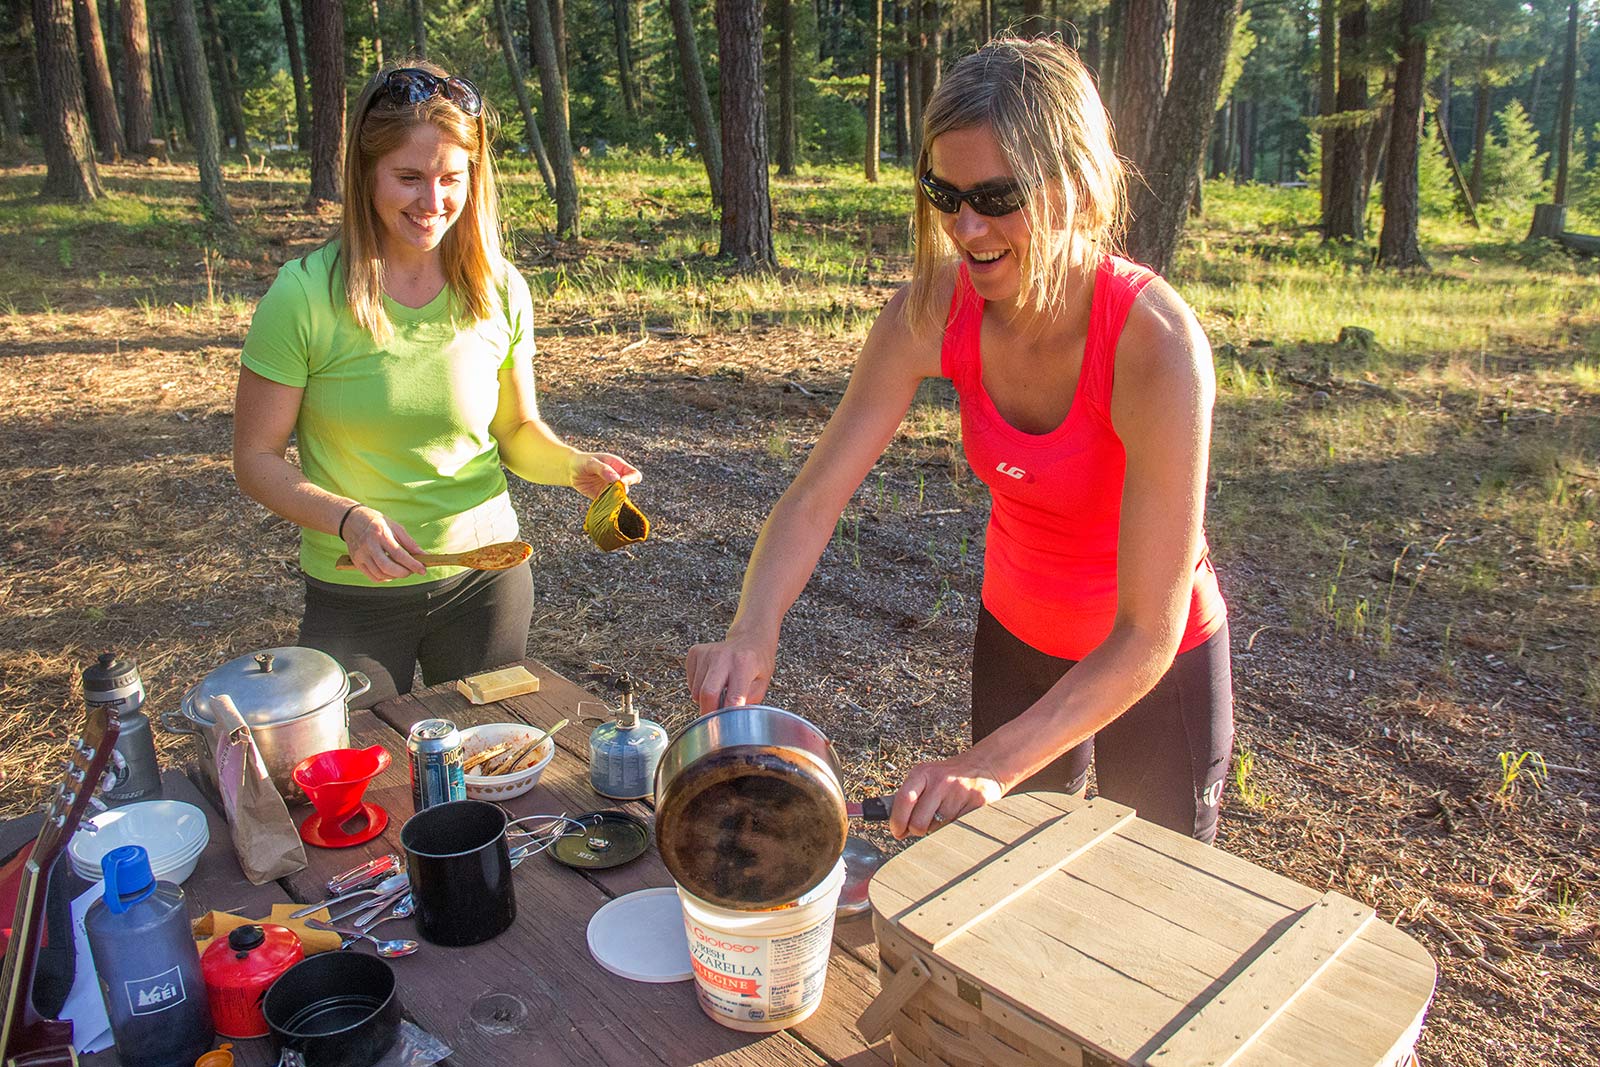 Cyclists cook up some food after a day of biking the Bitterroot Trail